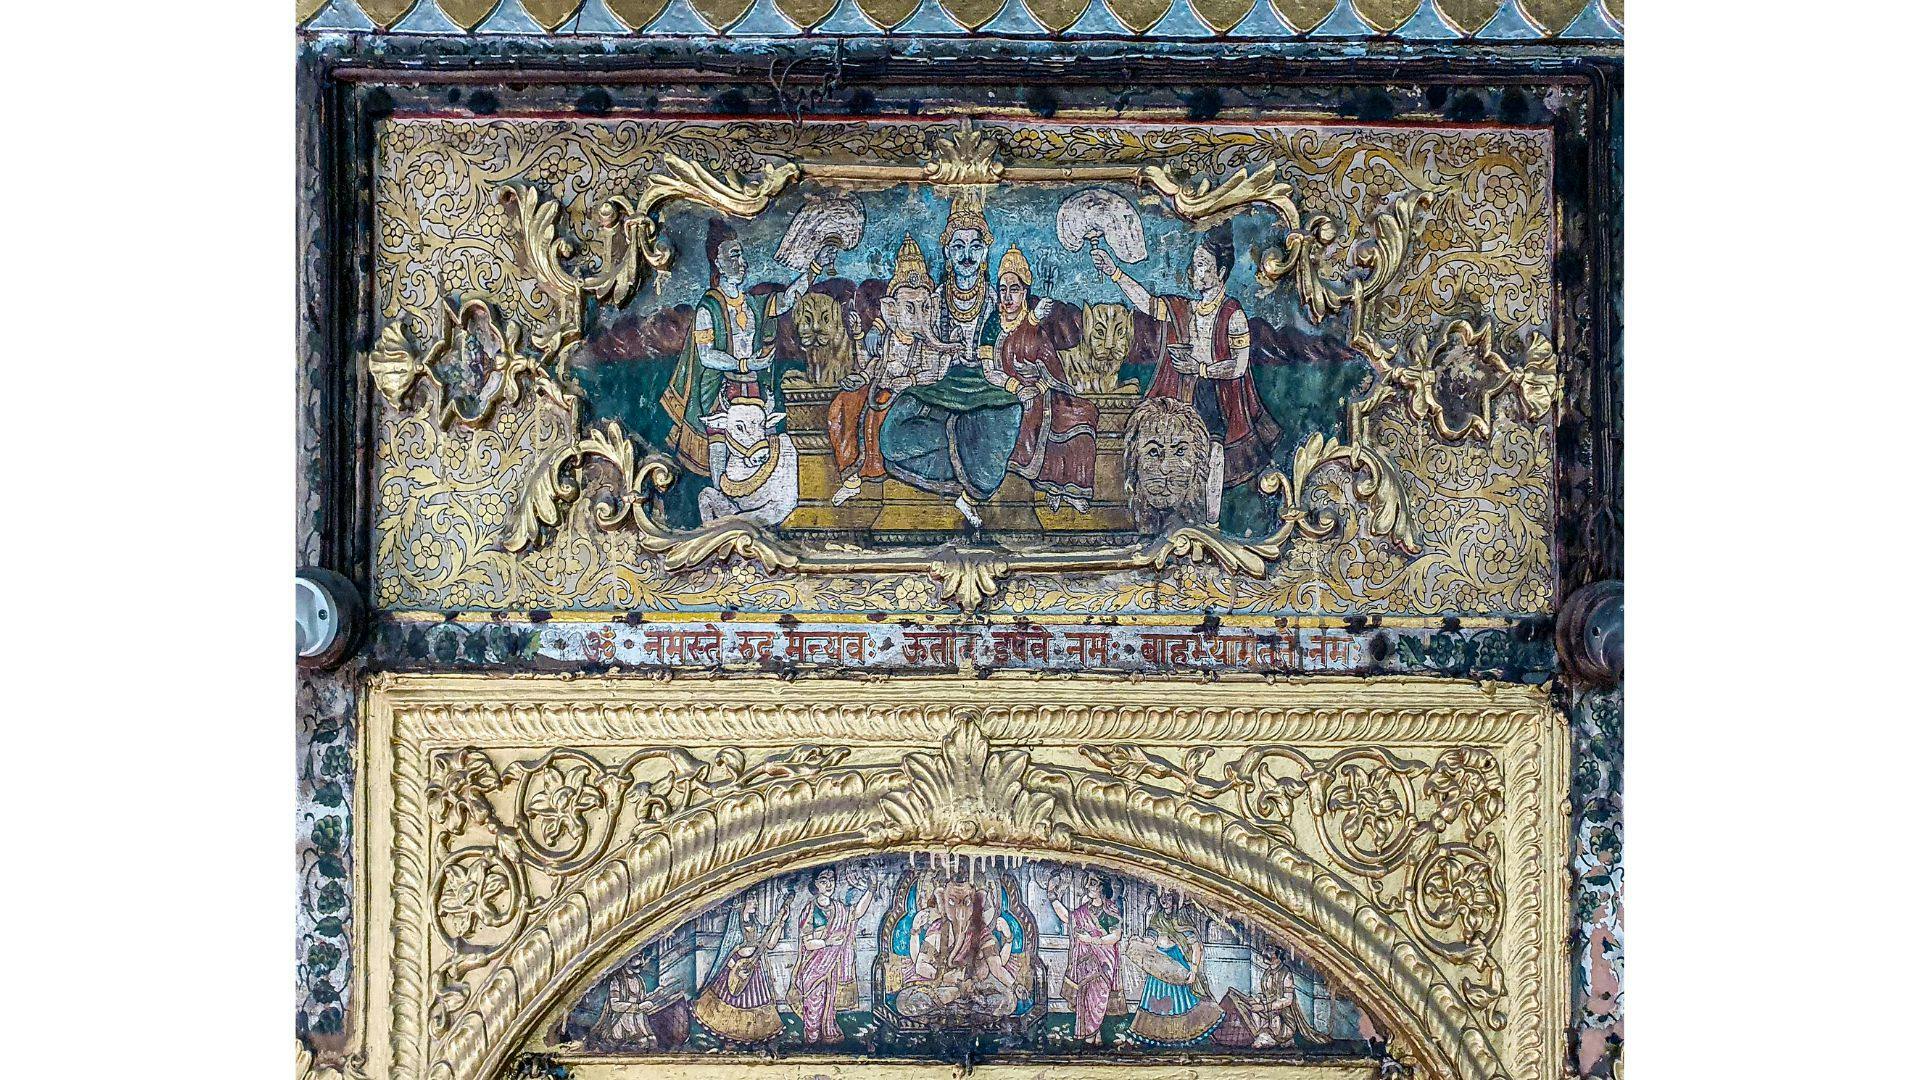 Paintings inside the temple